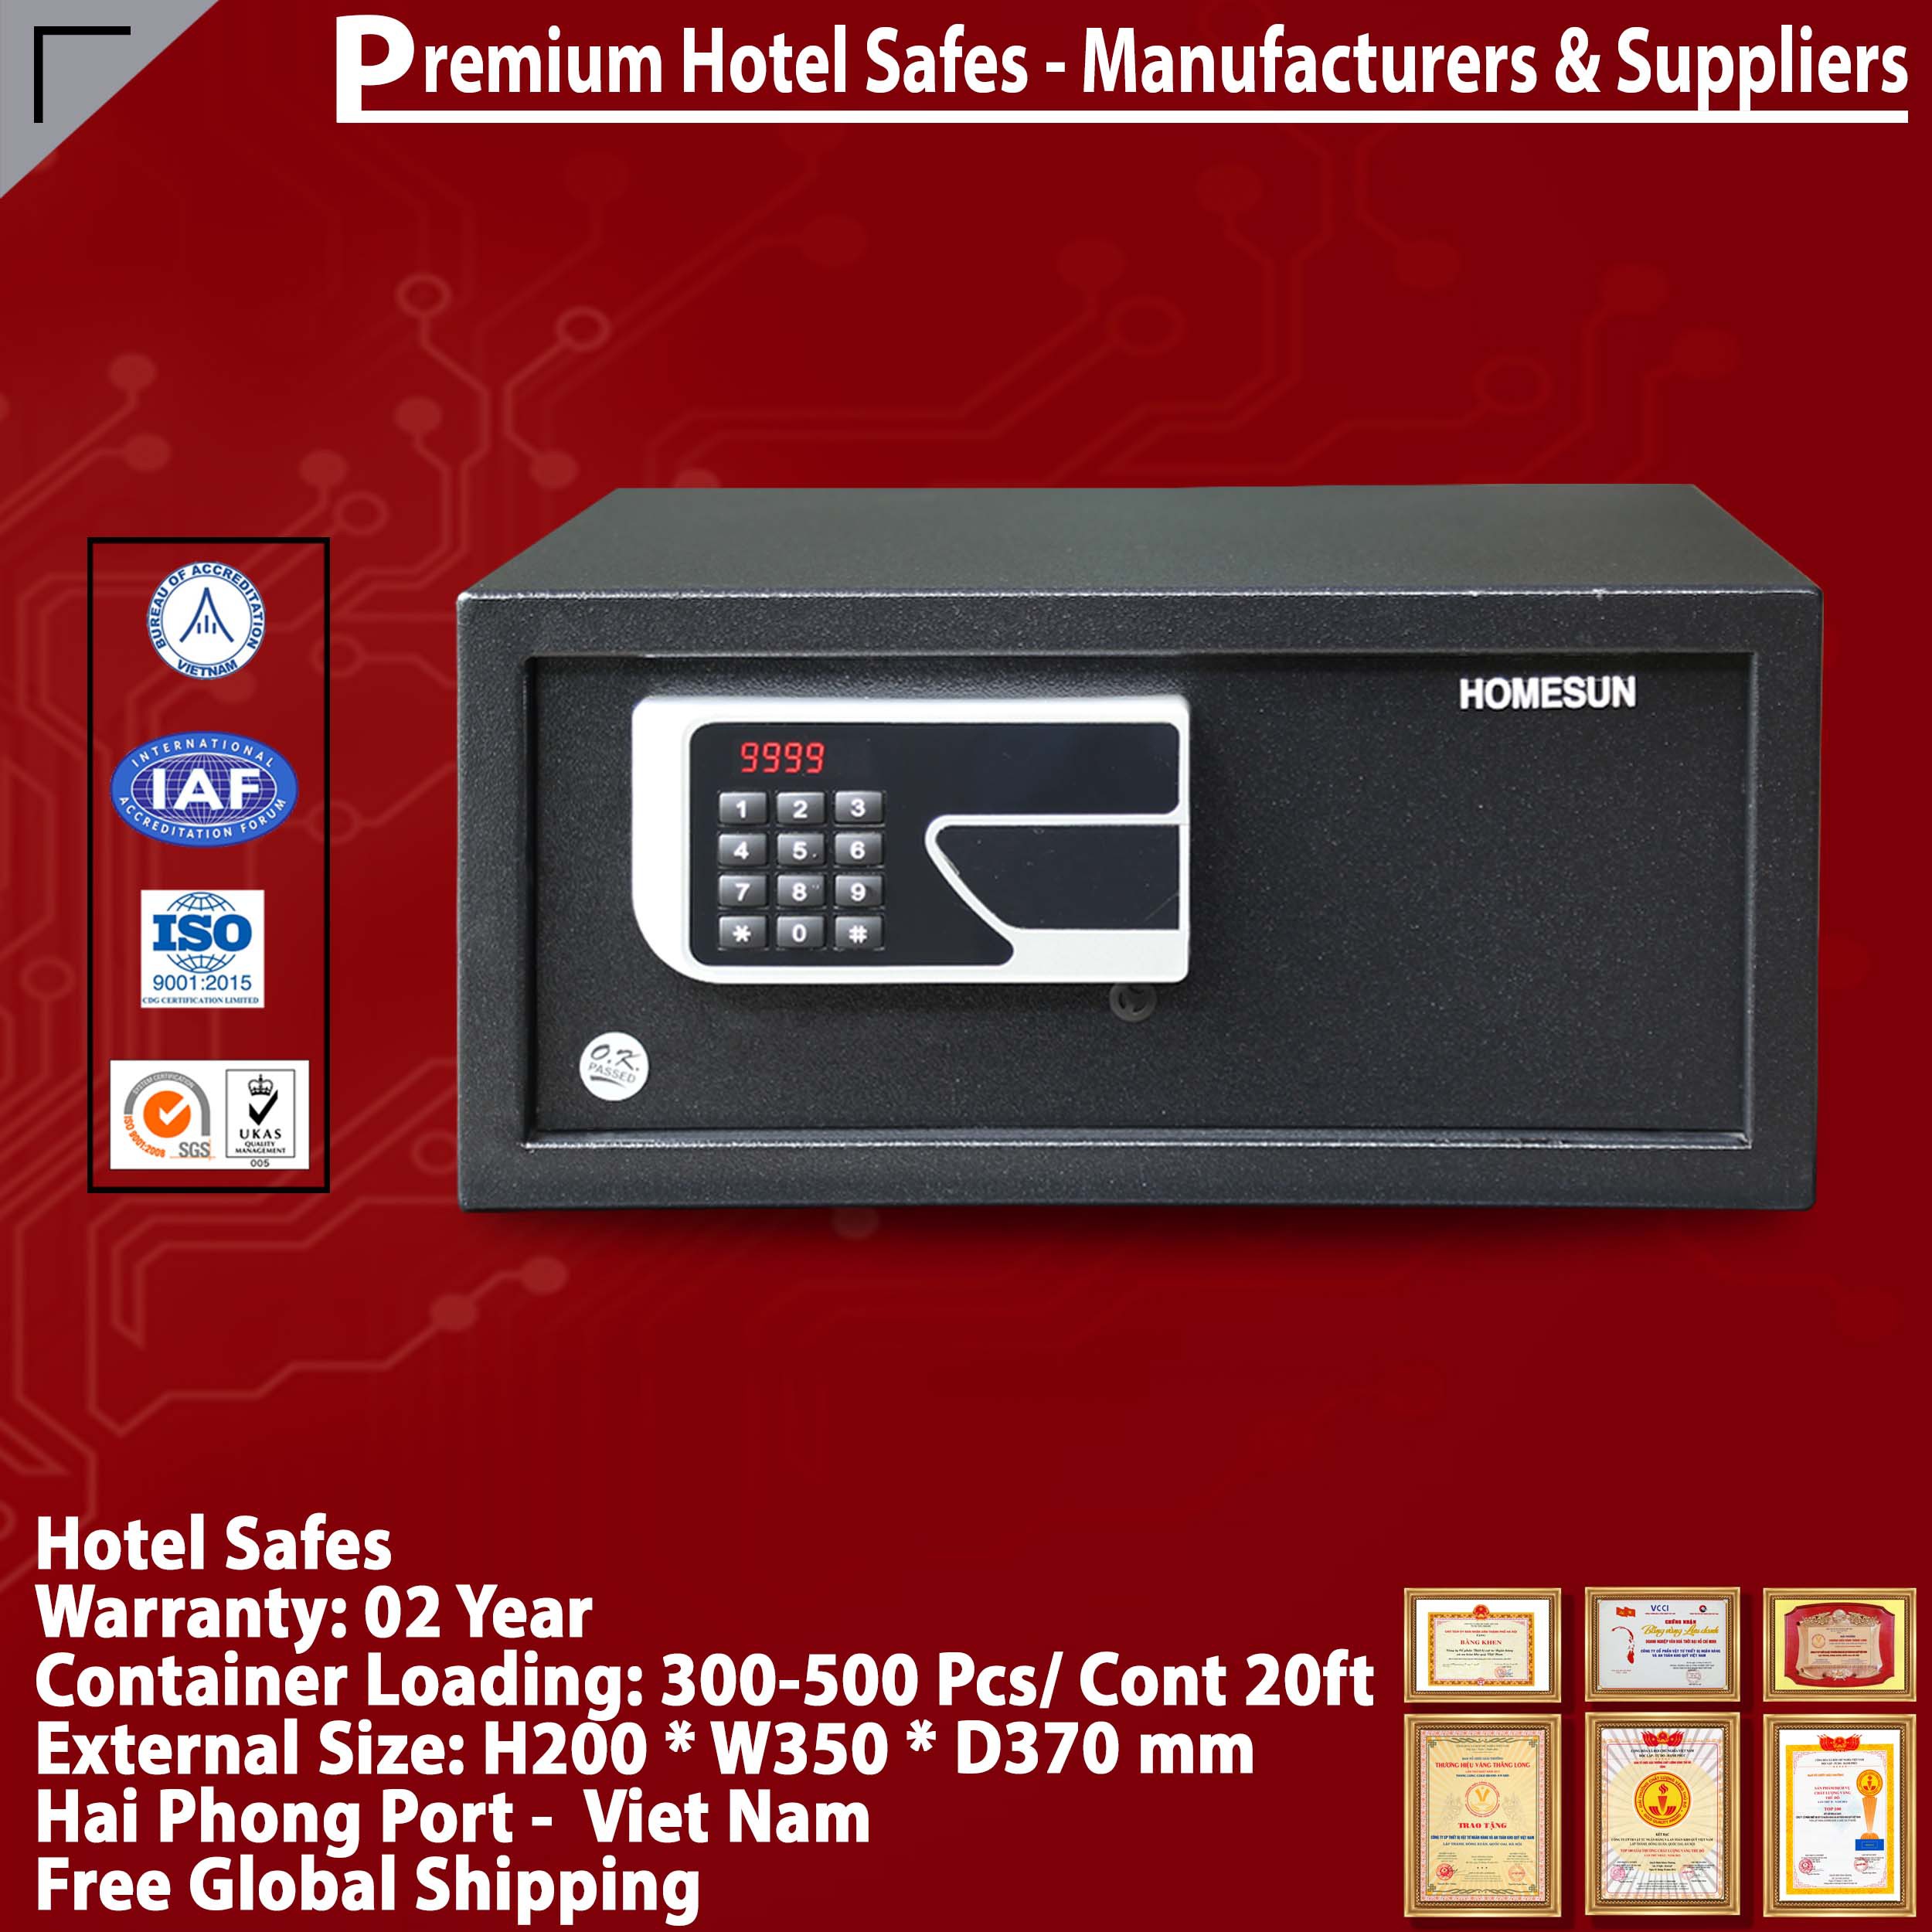 Used Hotel Safes Factory Direct & Fast Shipping‎